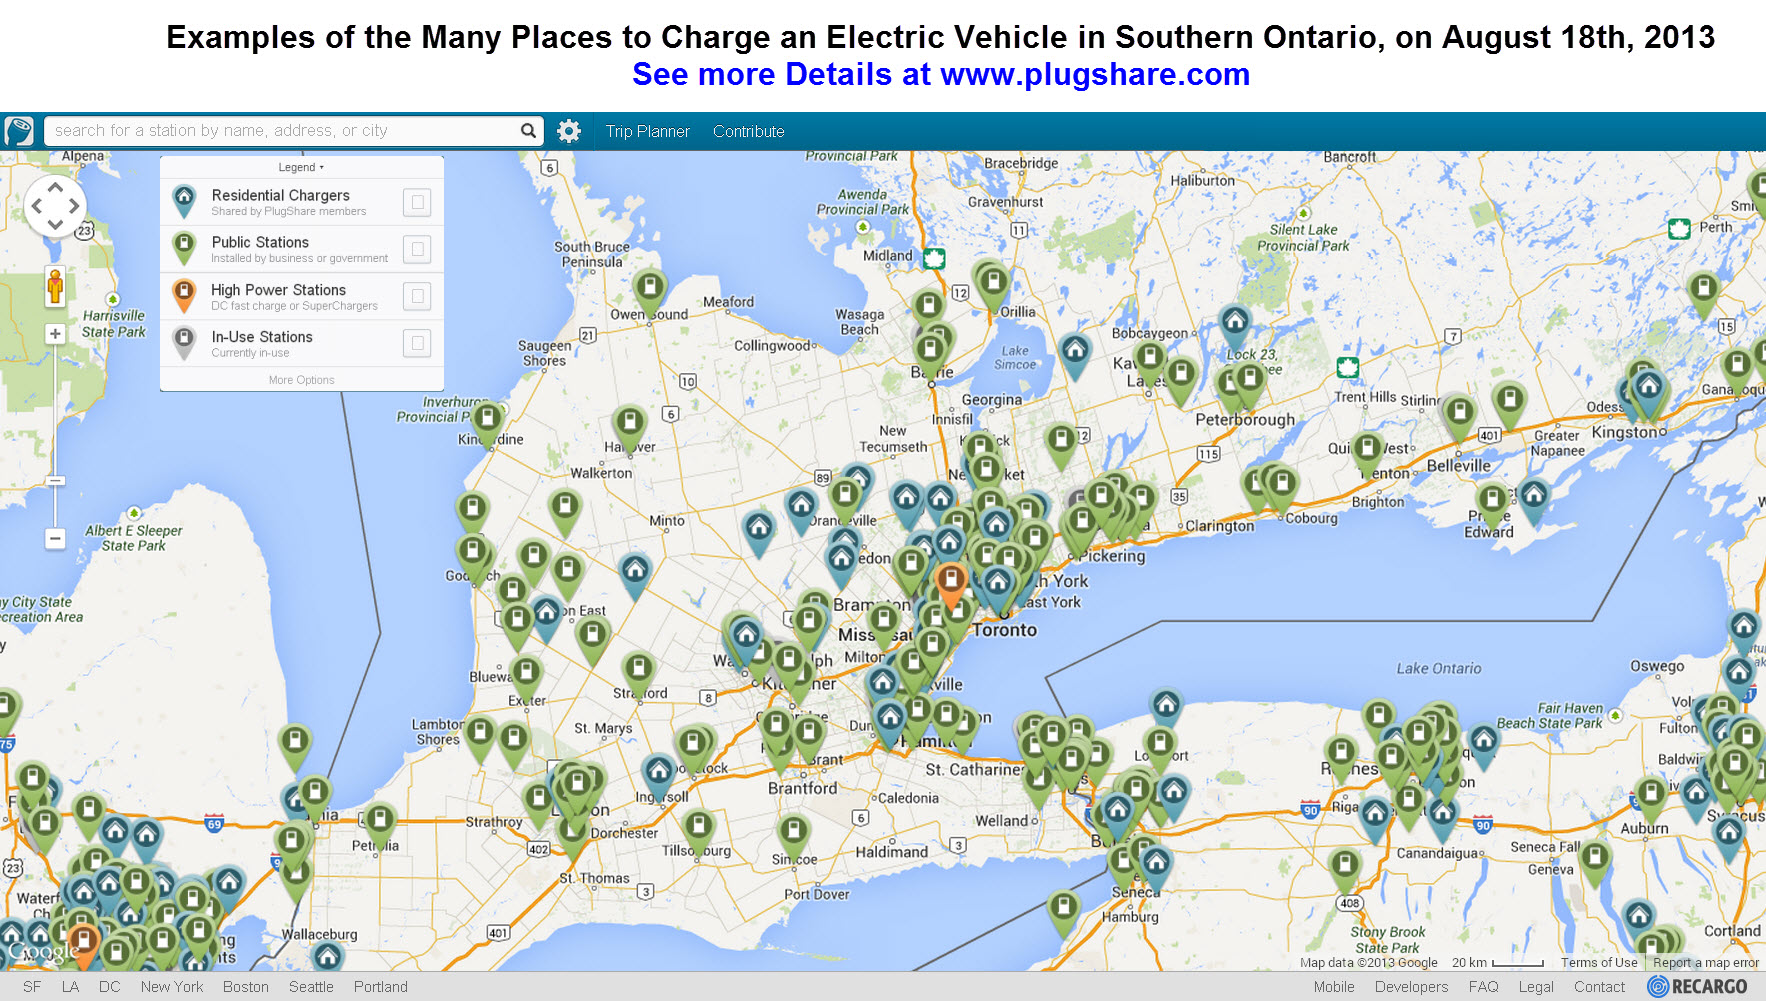 Just How Many EV Chargers are there in Late August 2013? This many in Southern Ontario!